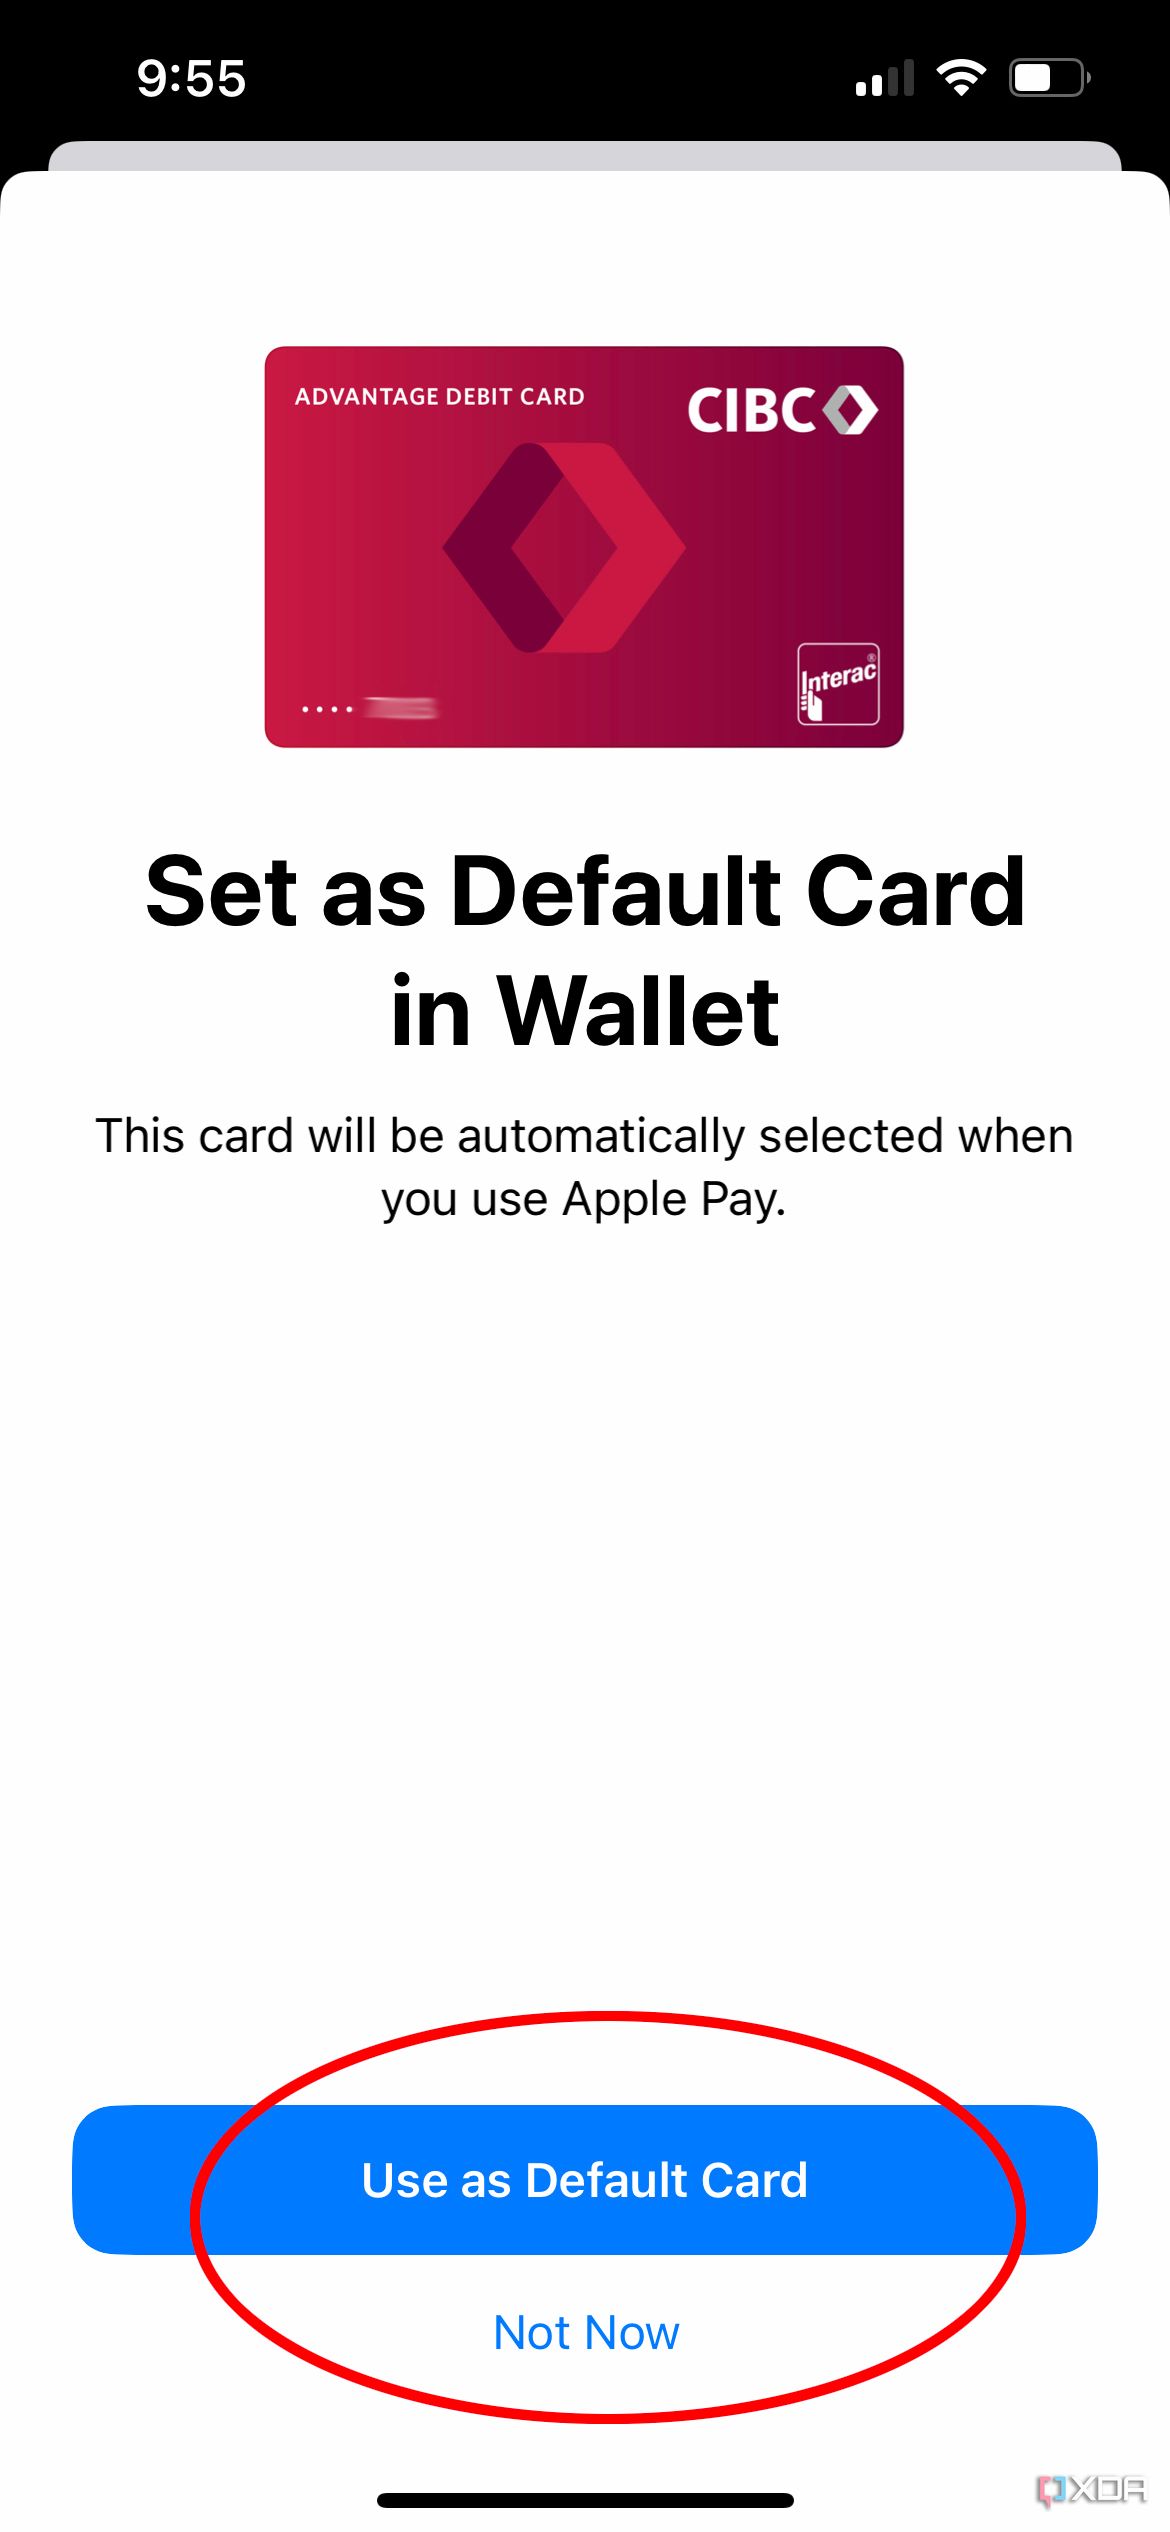 The page to set a new card as default in Apple Wallet.